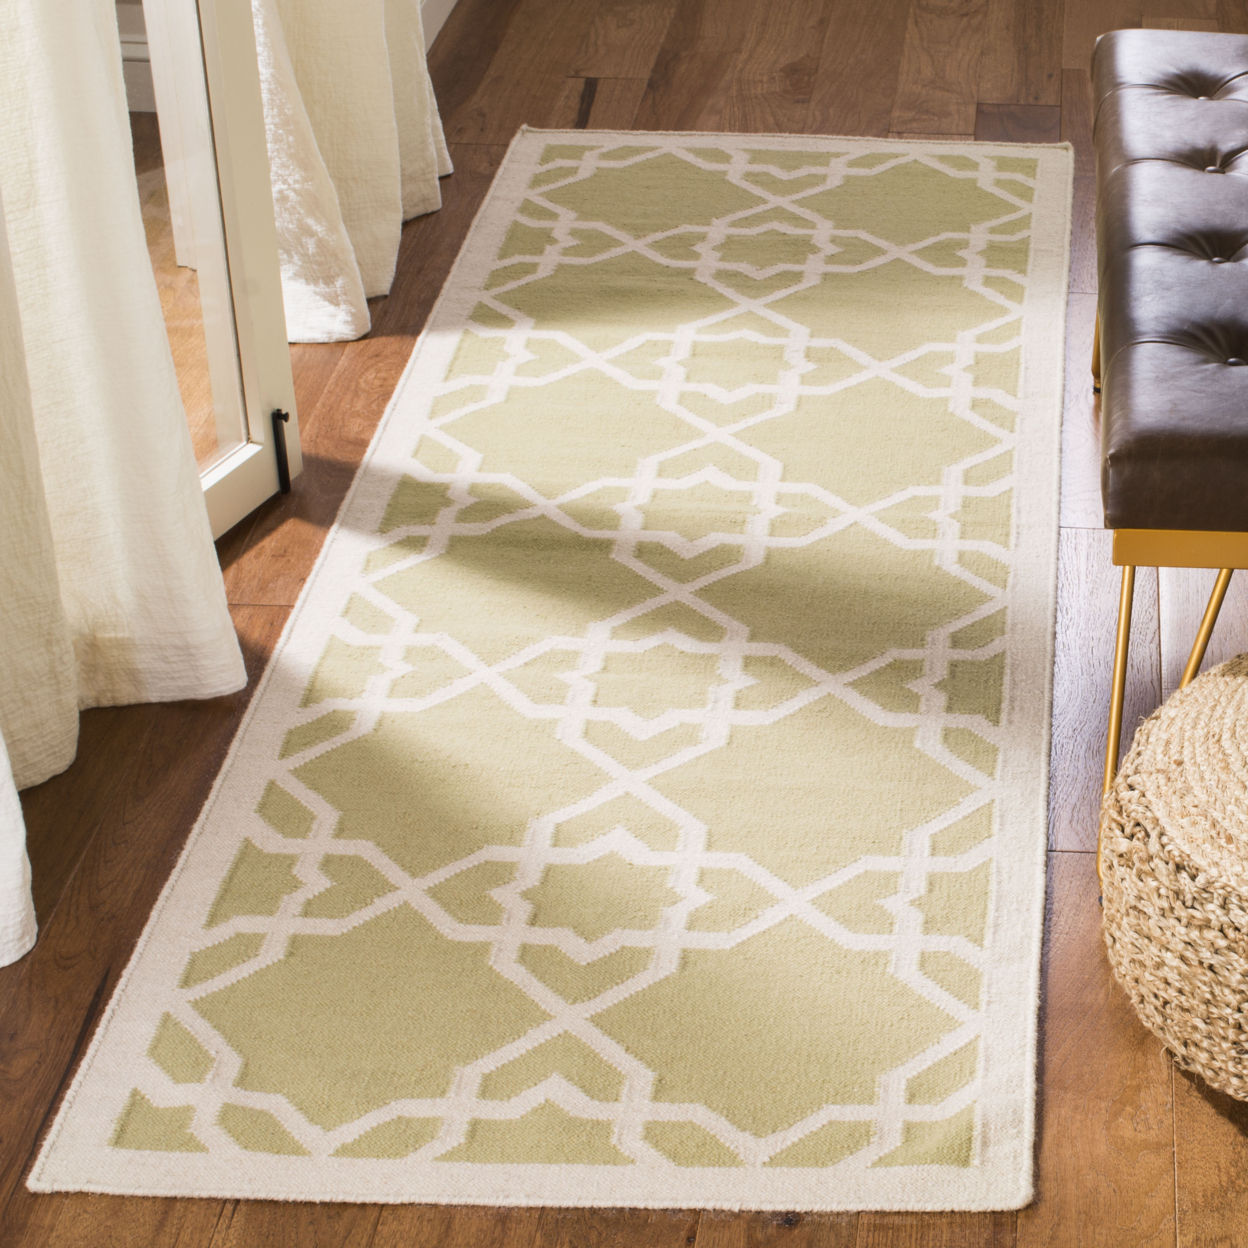 SAFAVIEH Dhurries DHU548A Handwoven Olive / Ivory Rug - 6' X 9'